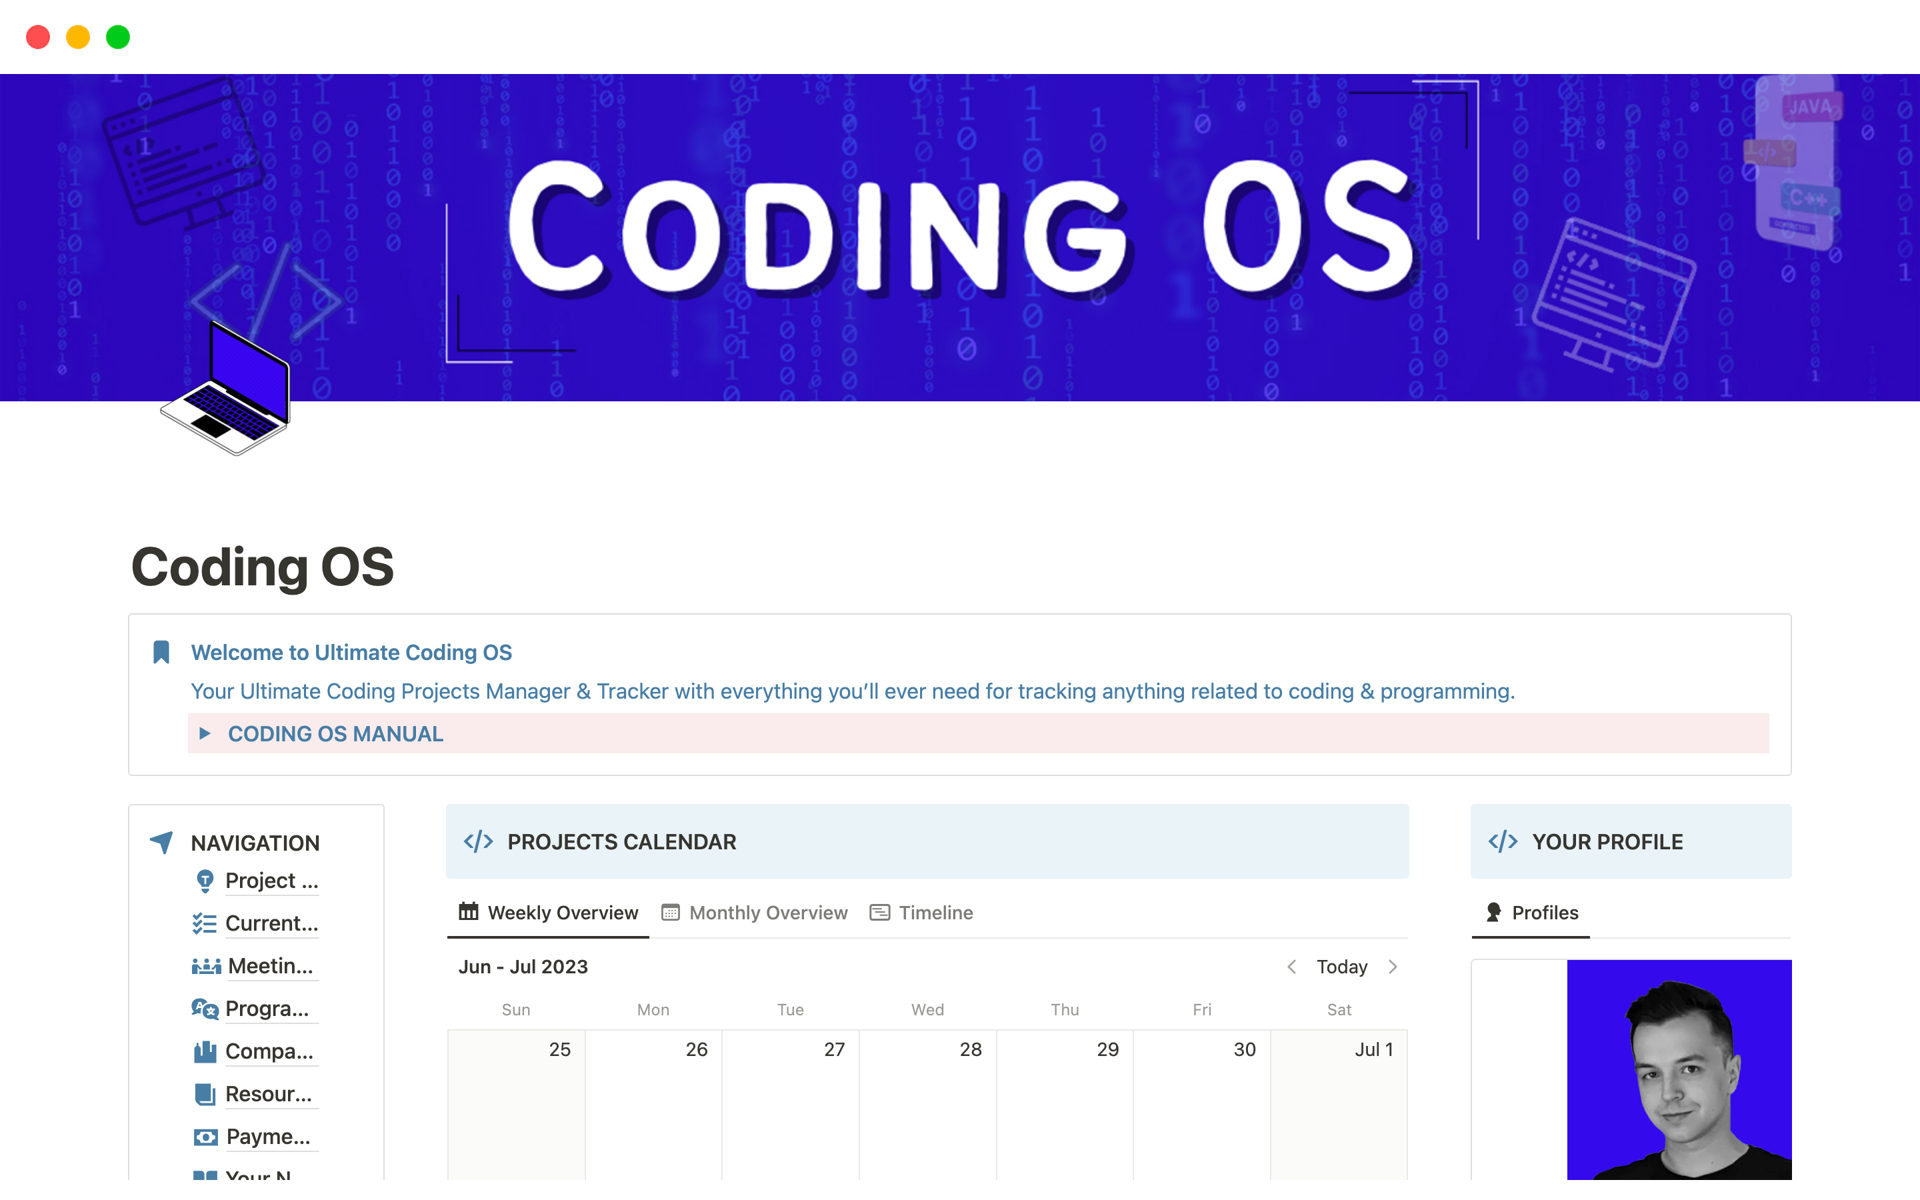 Your Ultimate Coding Projects Manager & Tracker: Coding OS
Available in 2 versions: Standard & Ultimate